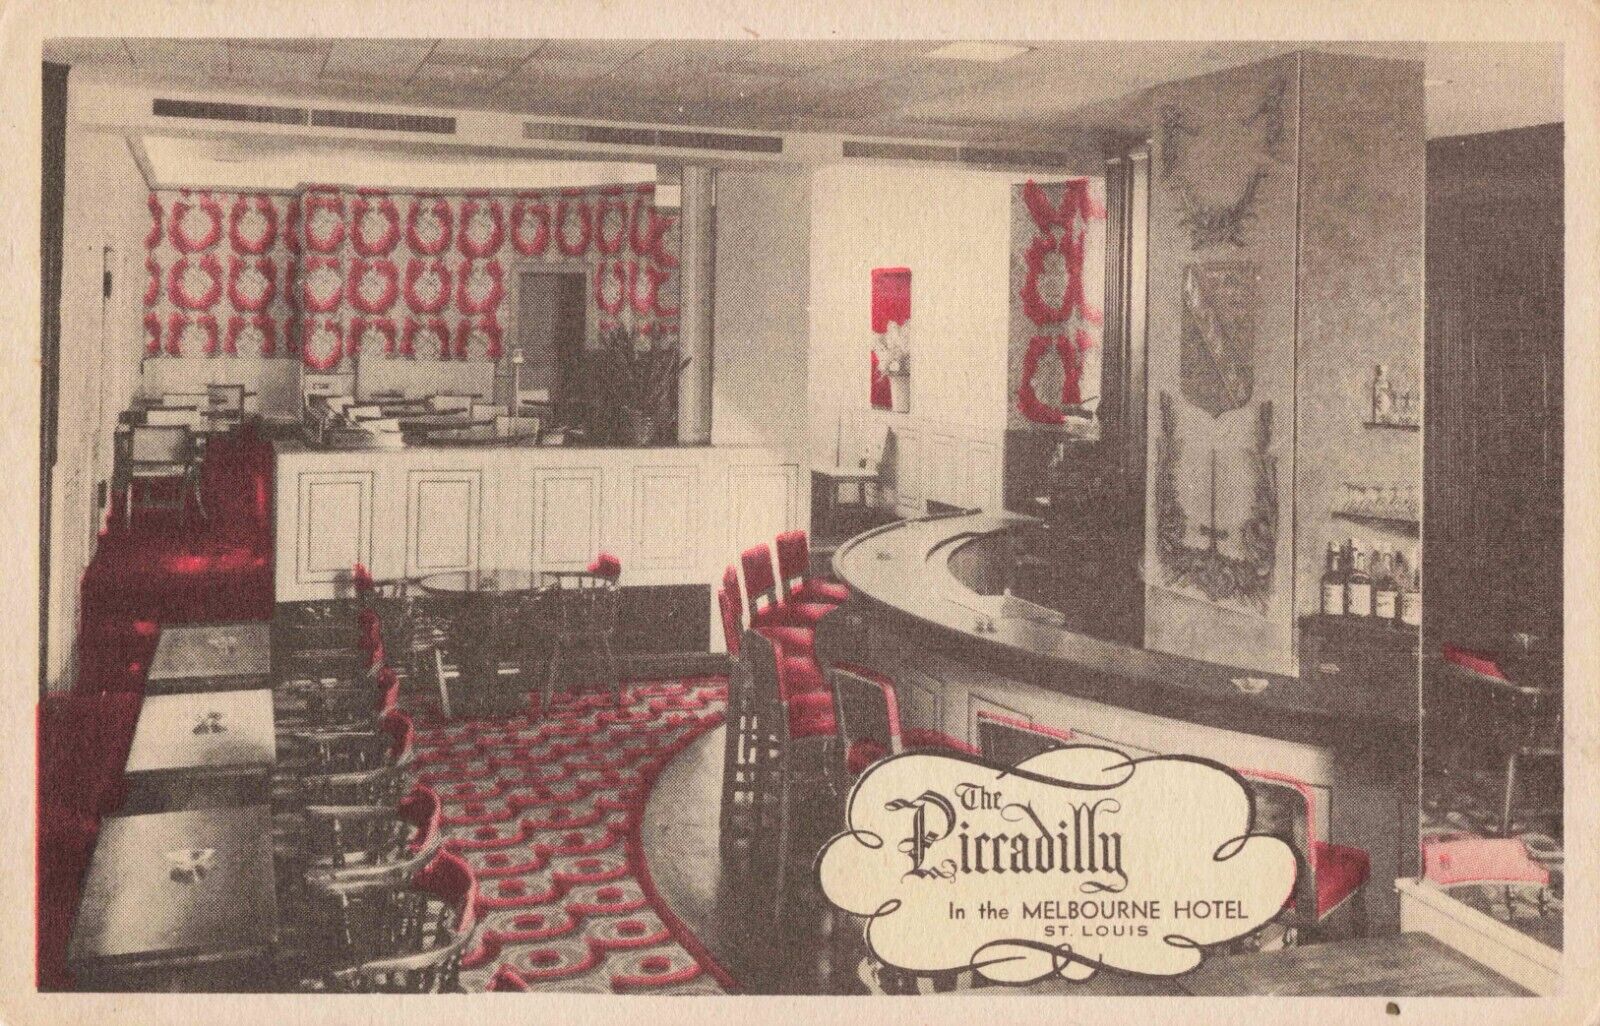 The Piccadilly Bar Melbourne Hotel St. Louis Missouri MO c1930 Postcard